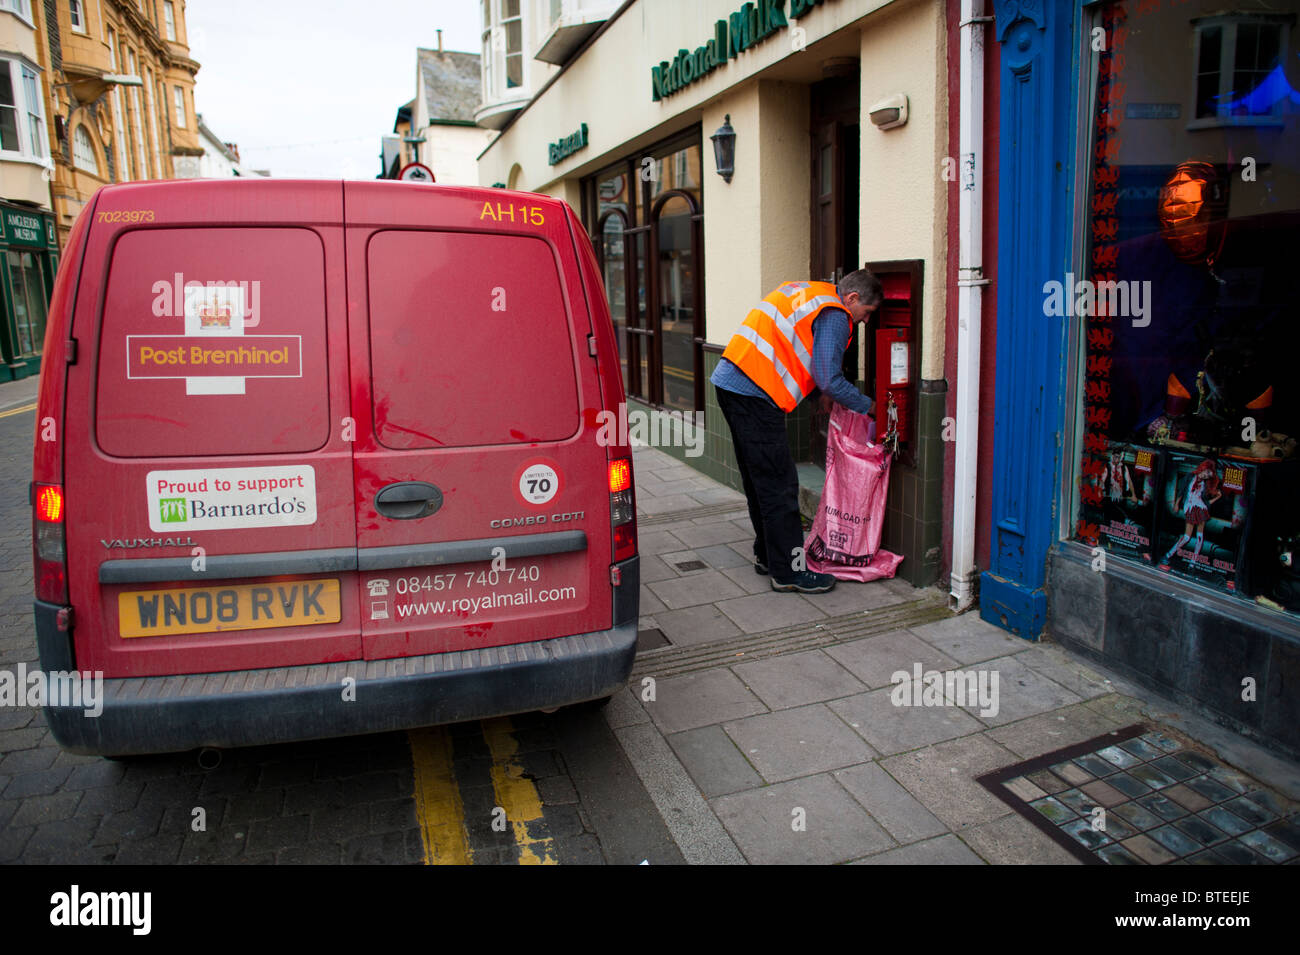 Royal Mail postman collecting post, Aberystwyth Wales UK Stock Photo